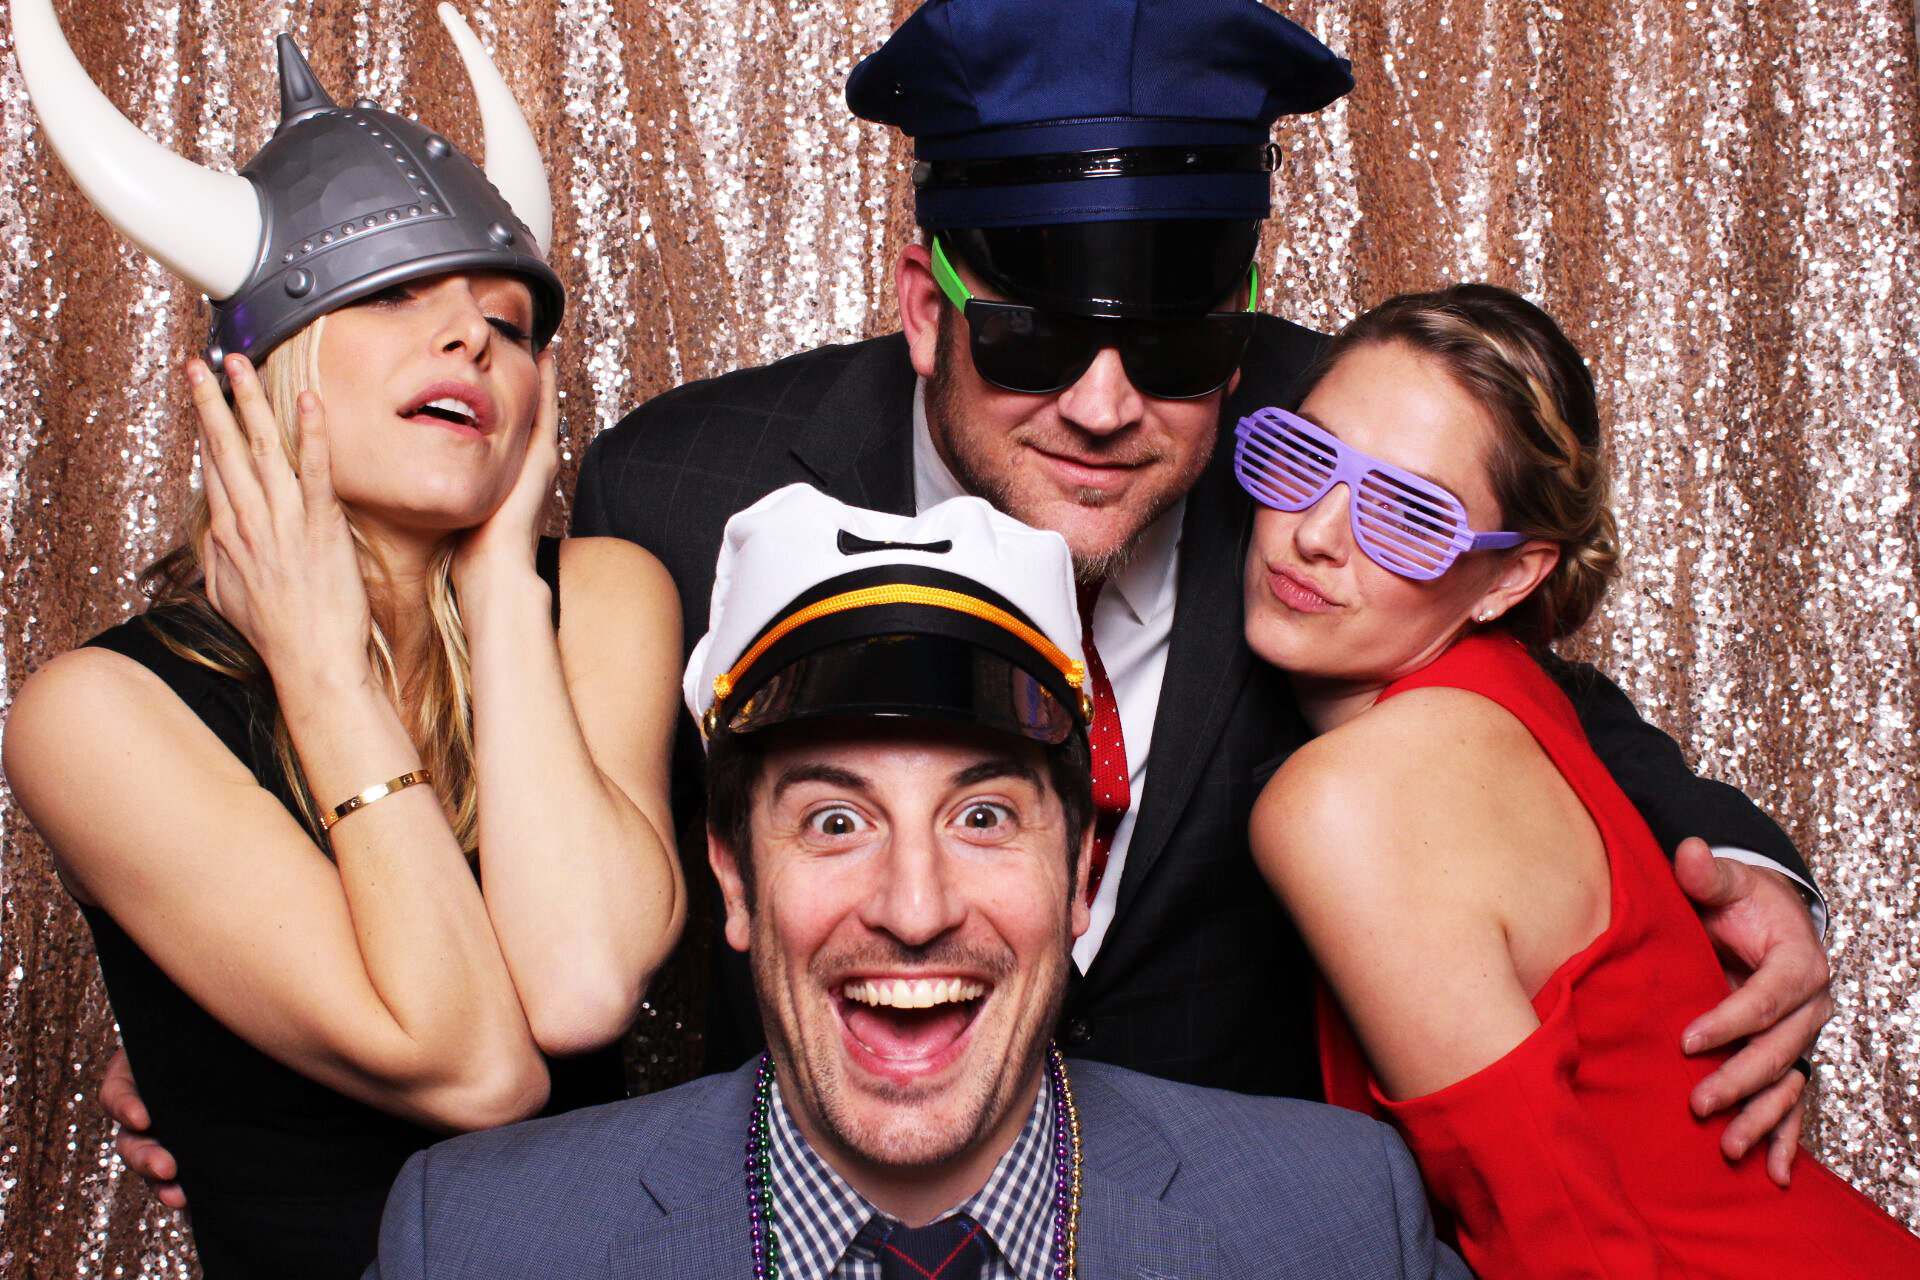 tangible-booth-the-photo-booth-people-5.jpg